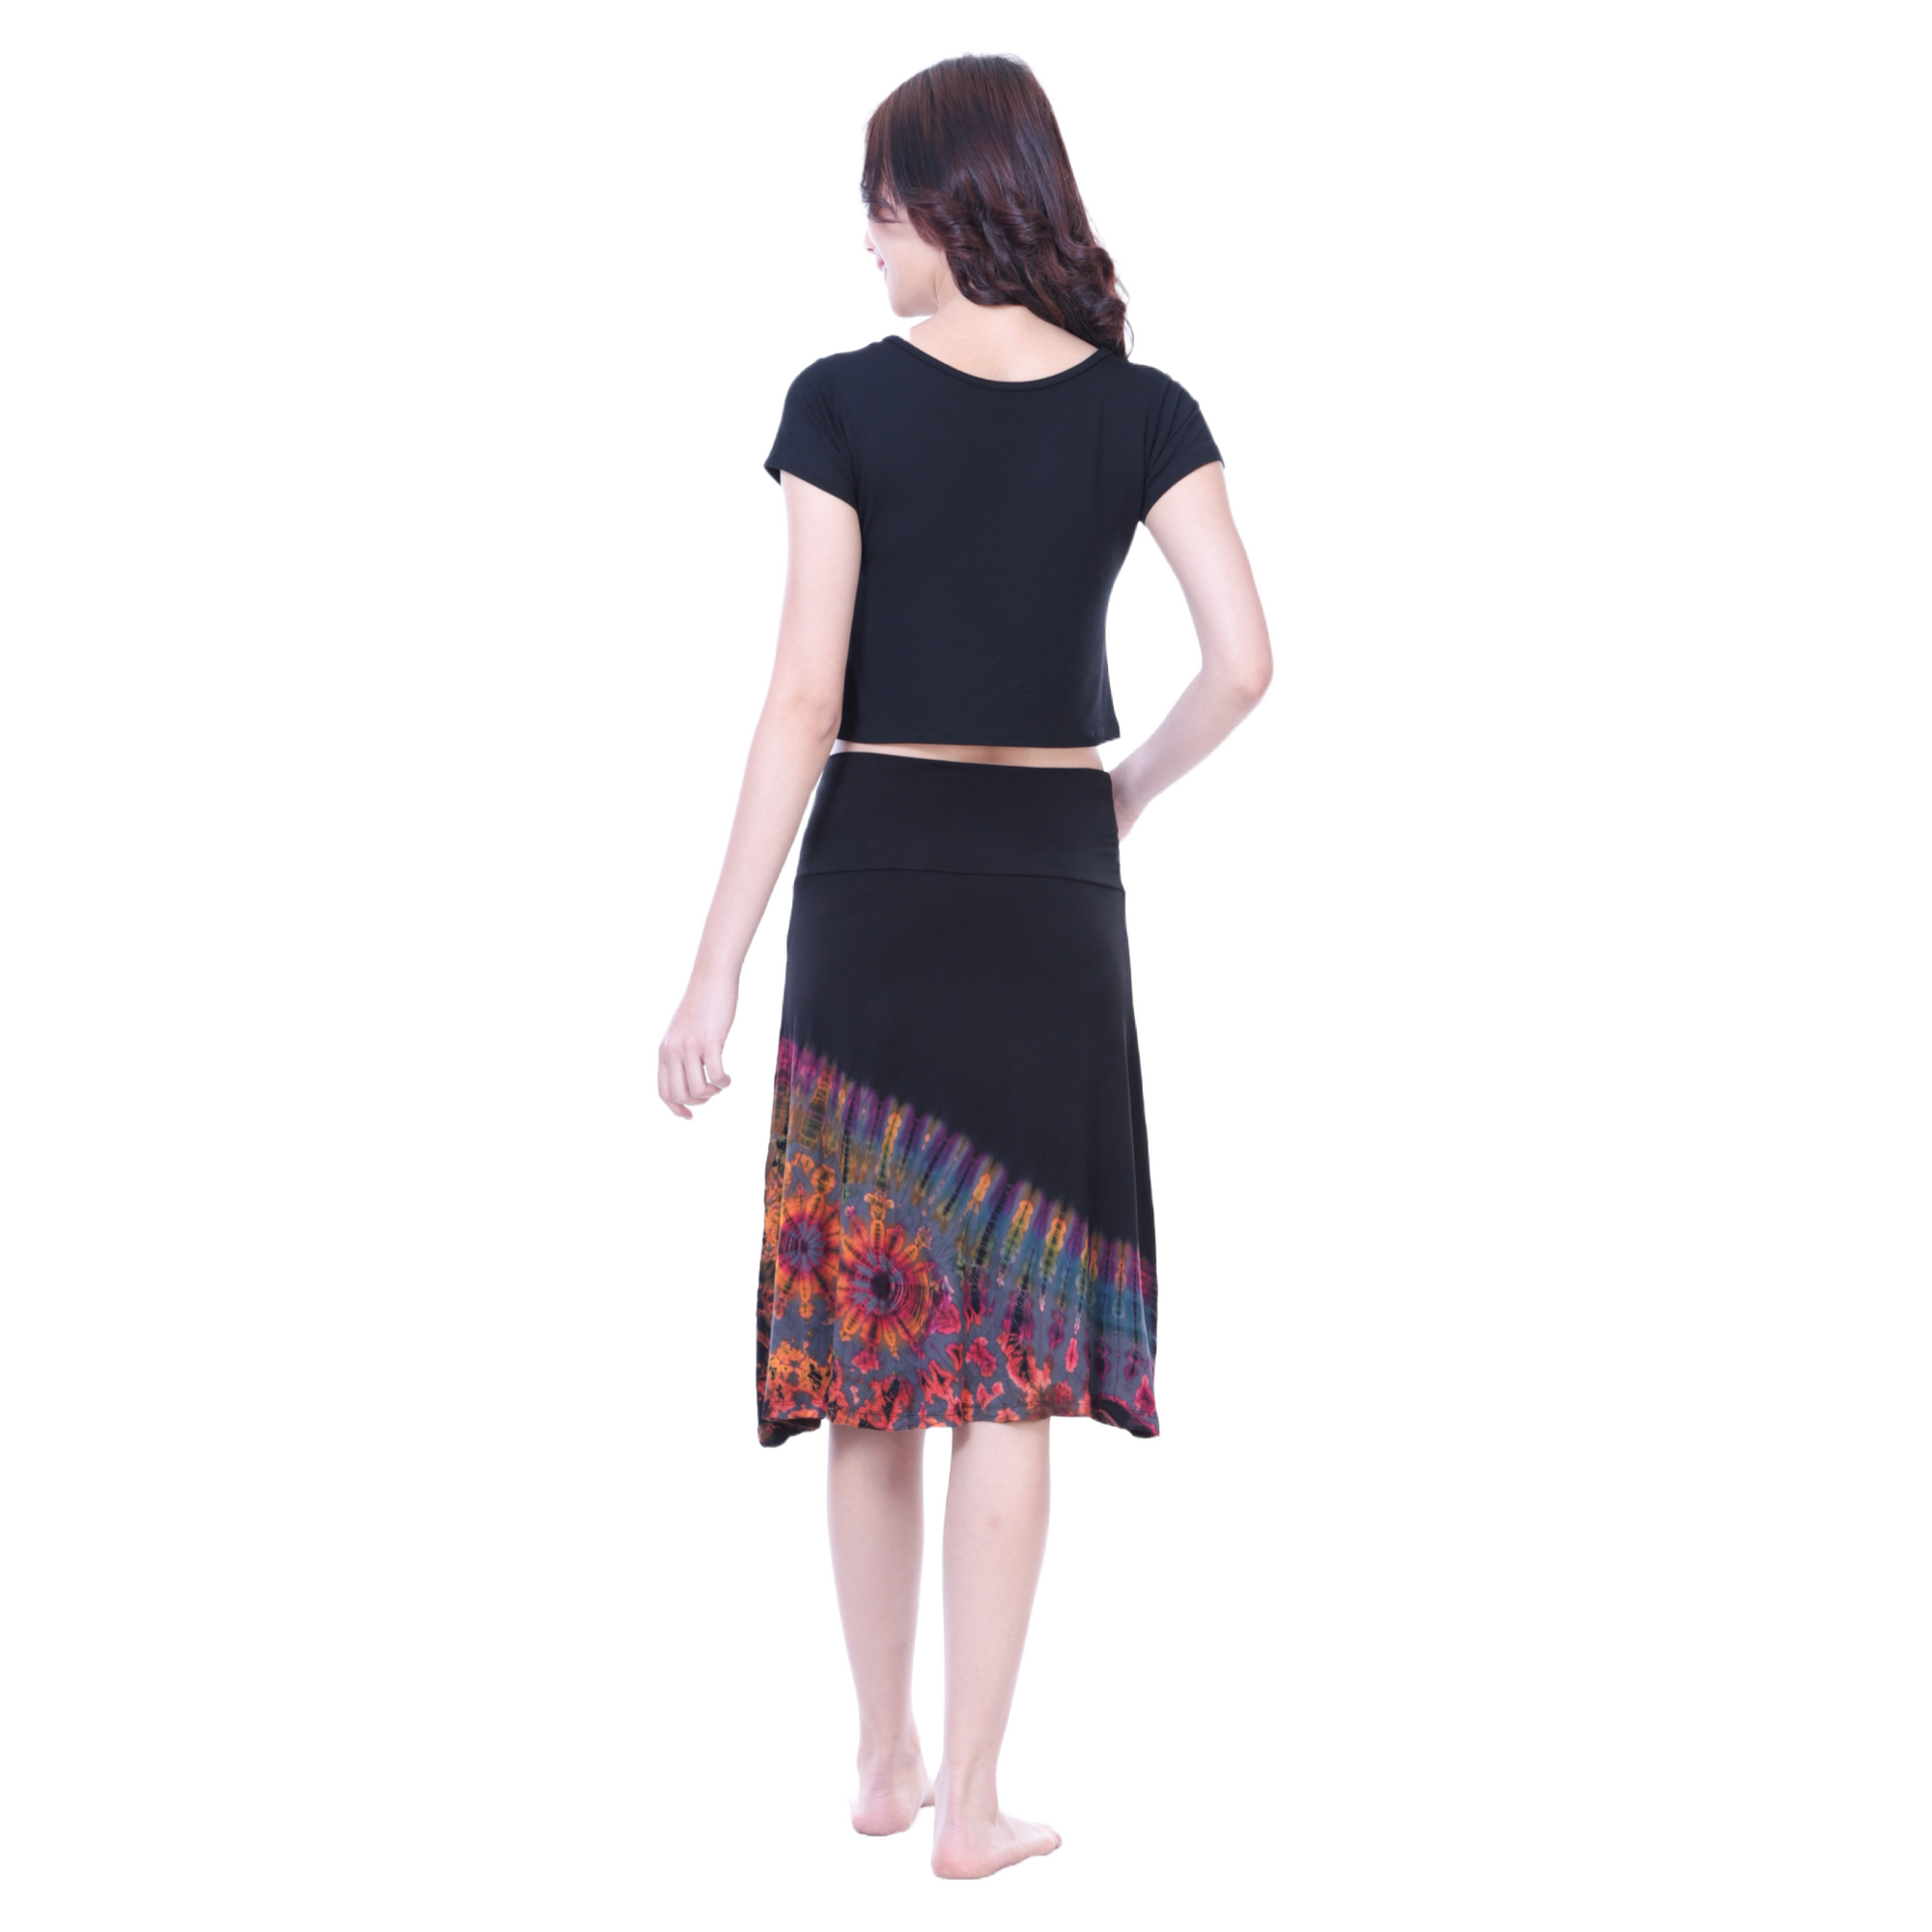 handmade tie-dye knee length flowy rayon pencil skirt | best price handmade clothing gbp | fits small to plus size